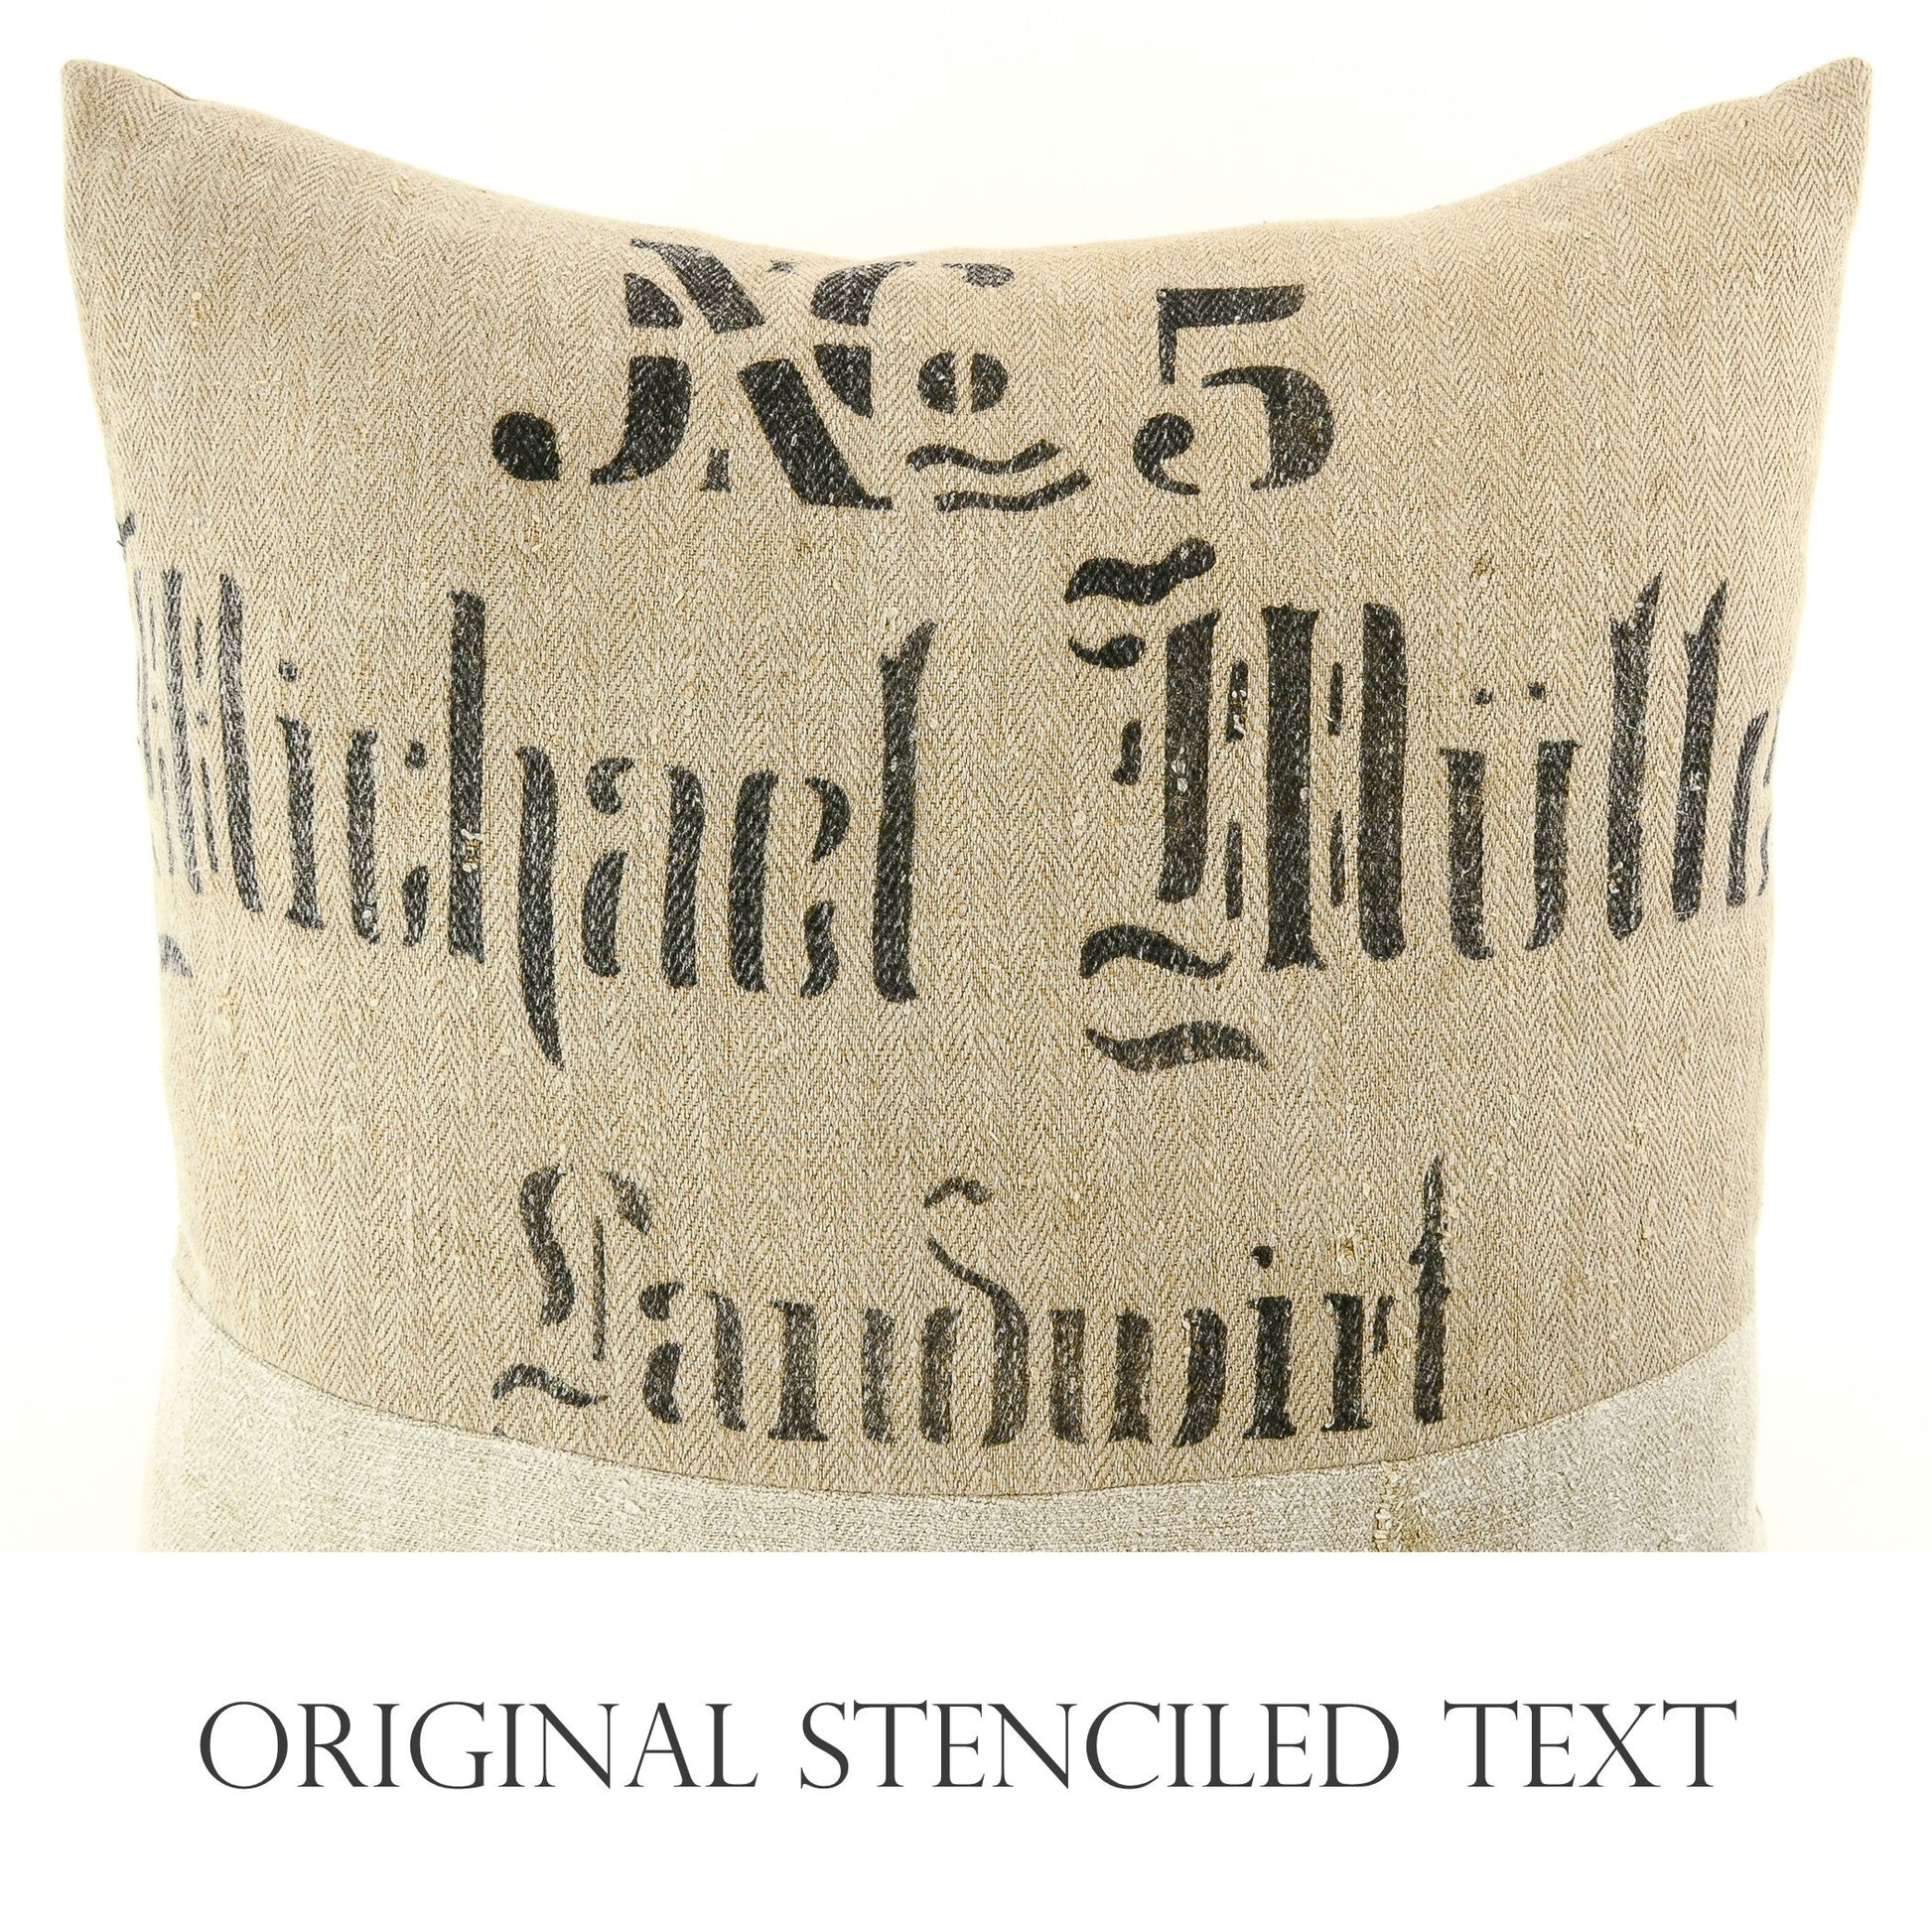 Front of pillow showing black stenciled lettering as follows: "No. 5, Michael Müller, Landwirt"